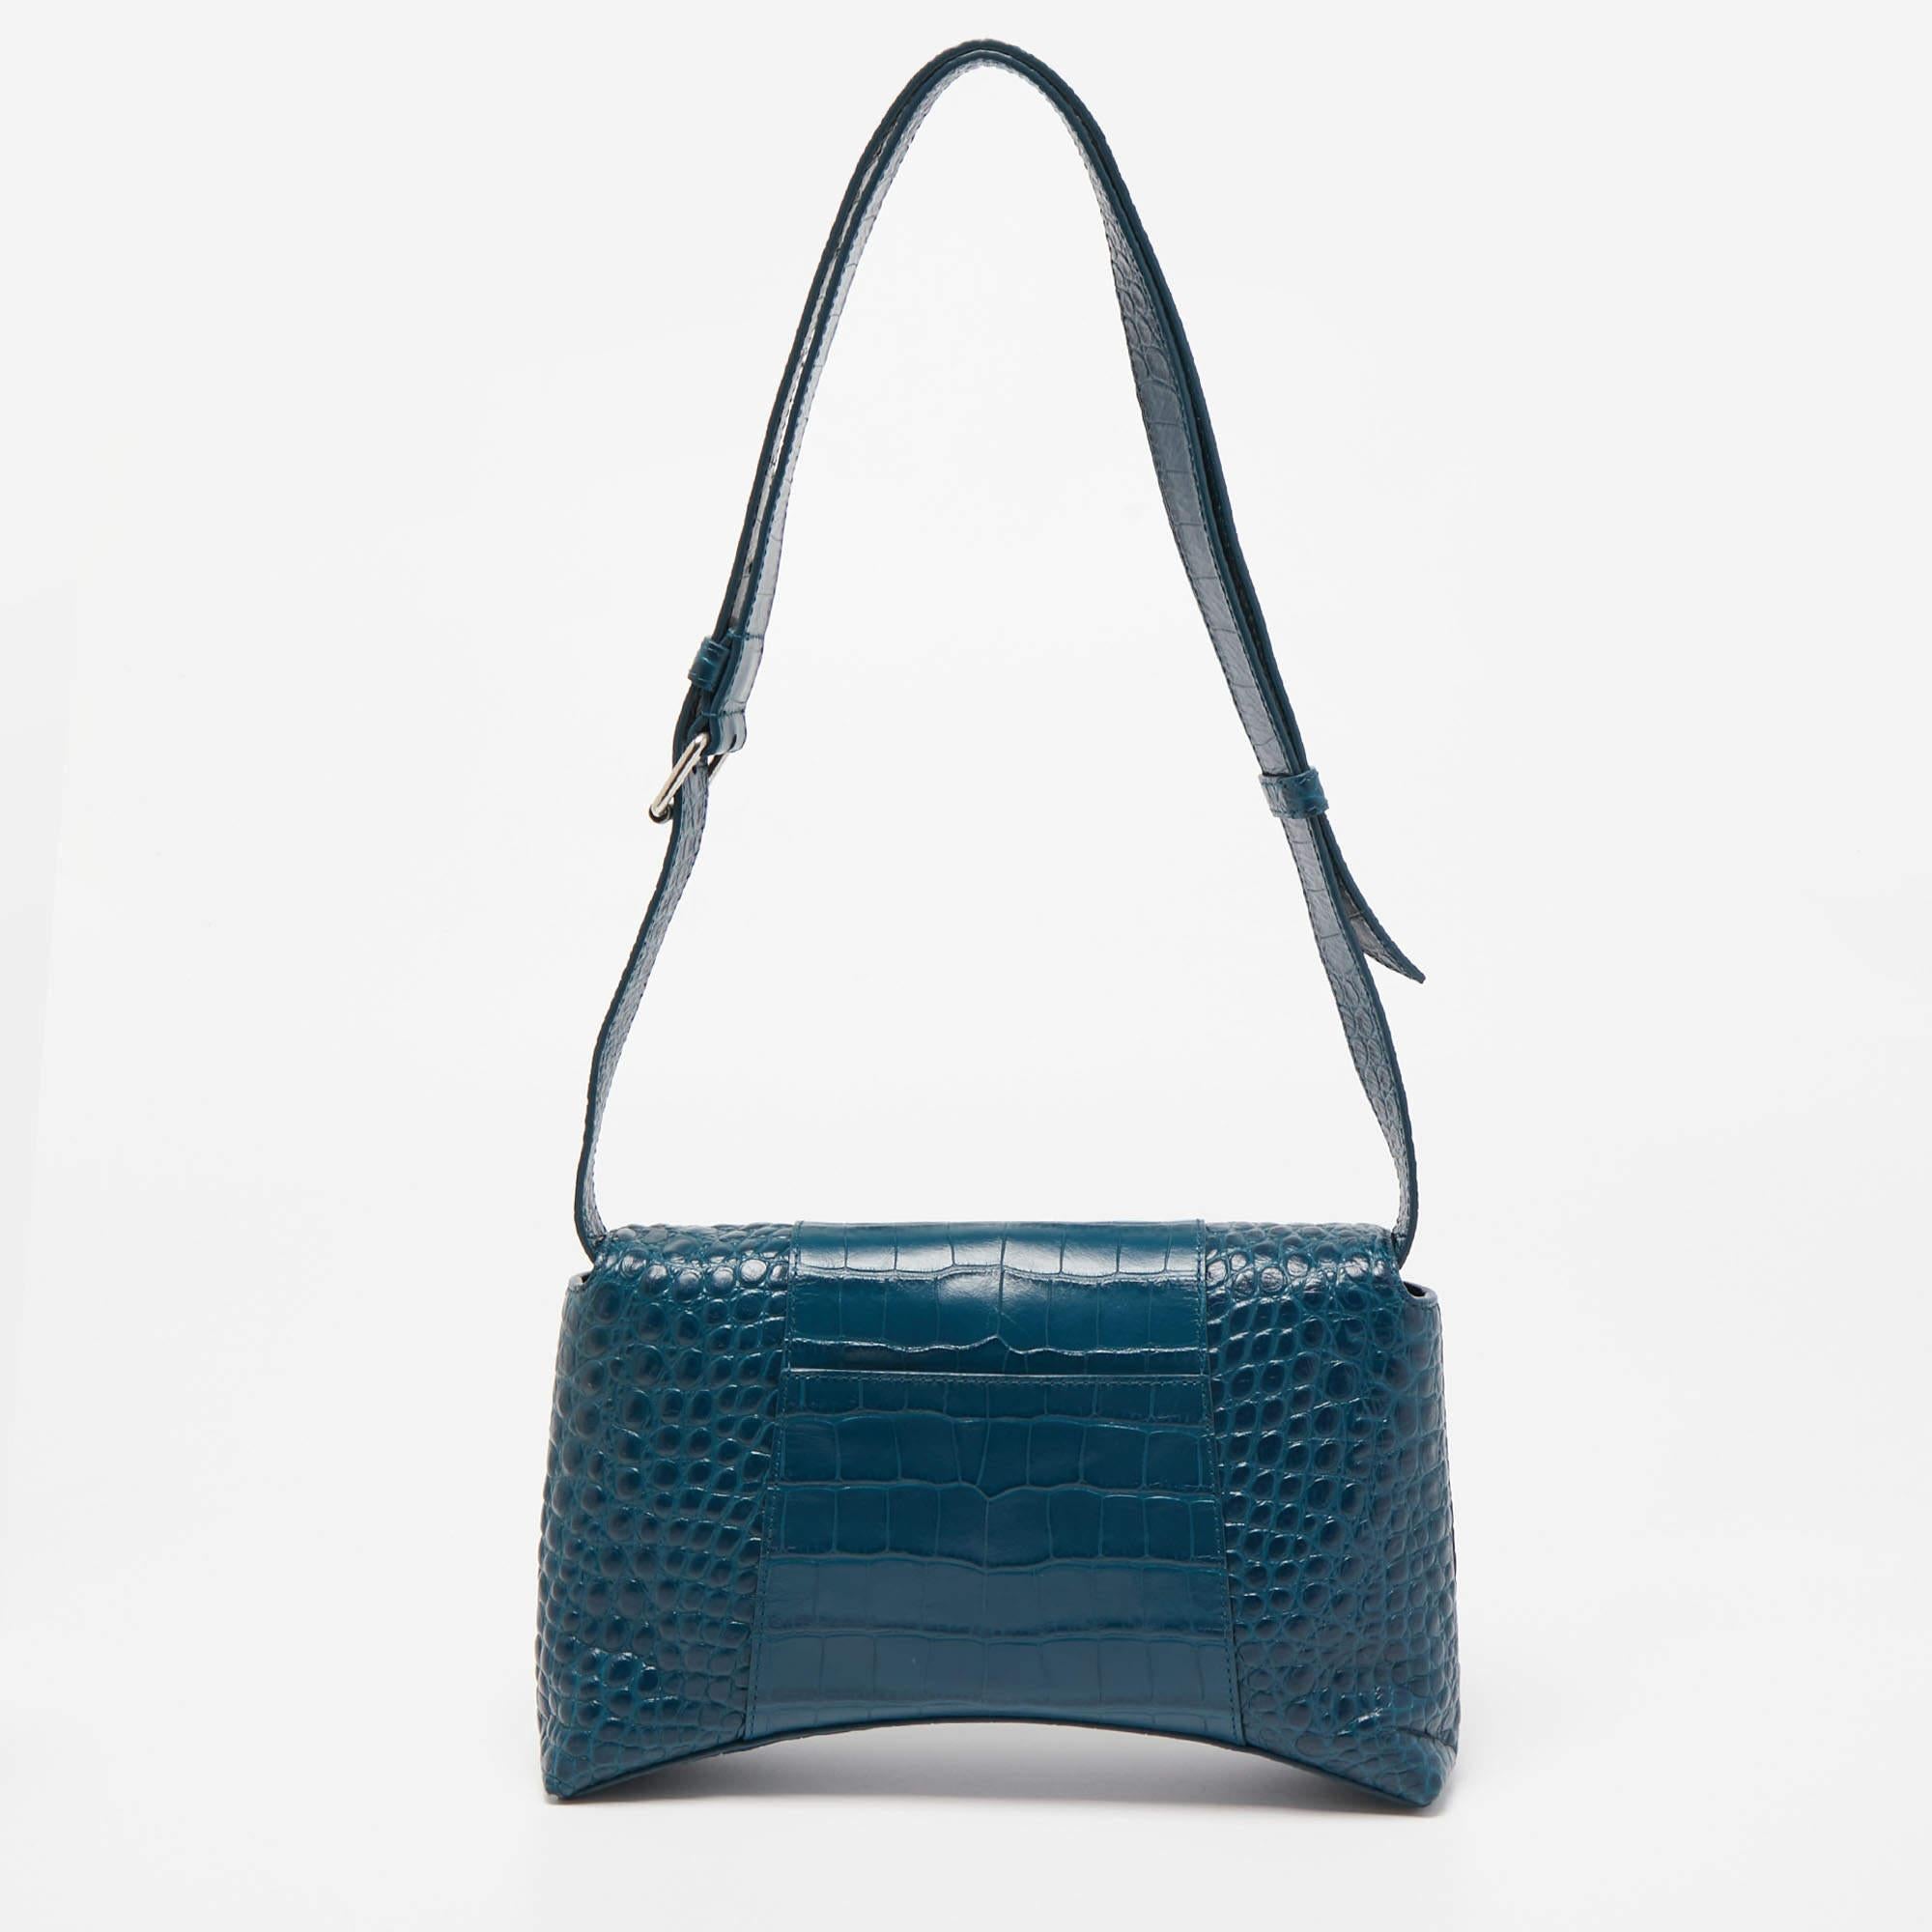 For a look that is complete with style, taste, and a touch of luxe, this shoulder bag is the perfect addition. Flaunt this beauty on your shoulder at any event and revel in the taste of luxury it leaves you with.

Includes: Original Dustbag, Info